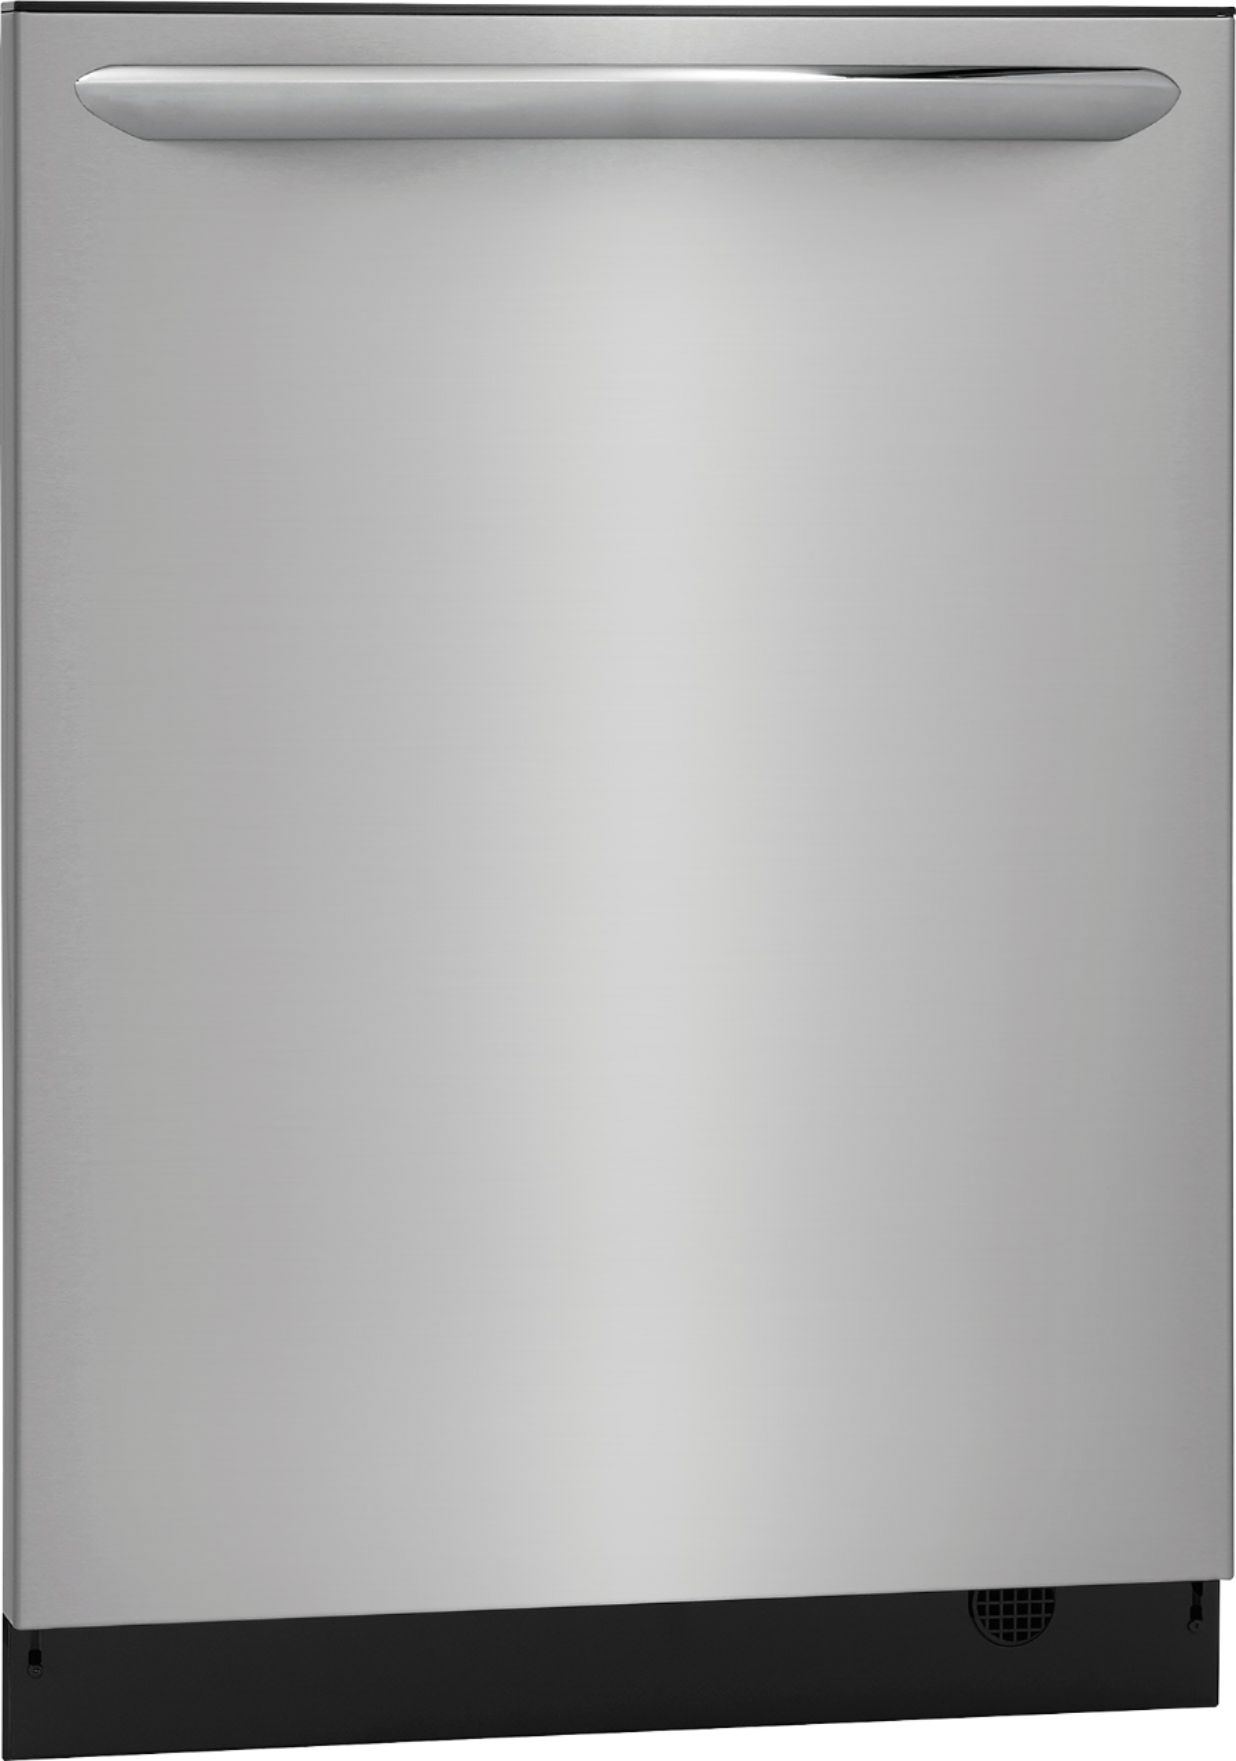 Frigidaire® 24'' Stainless Steel Built-In Dishwasher